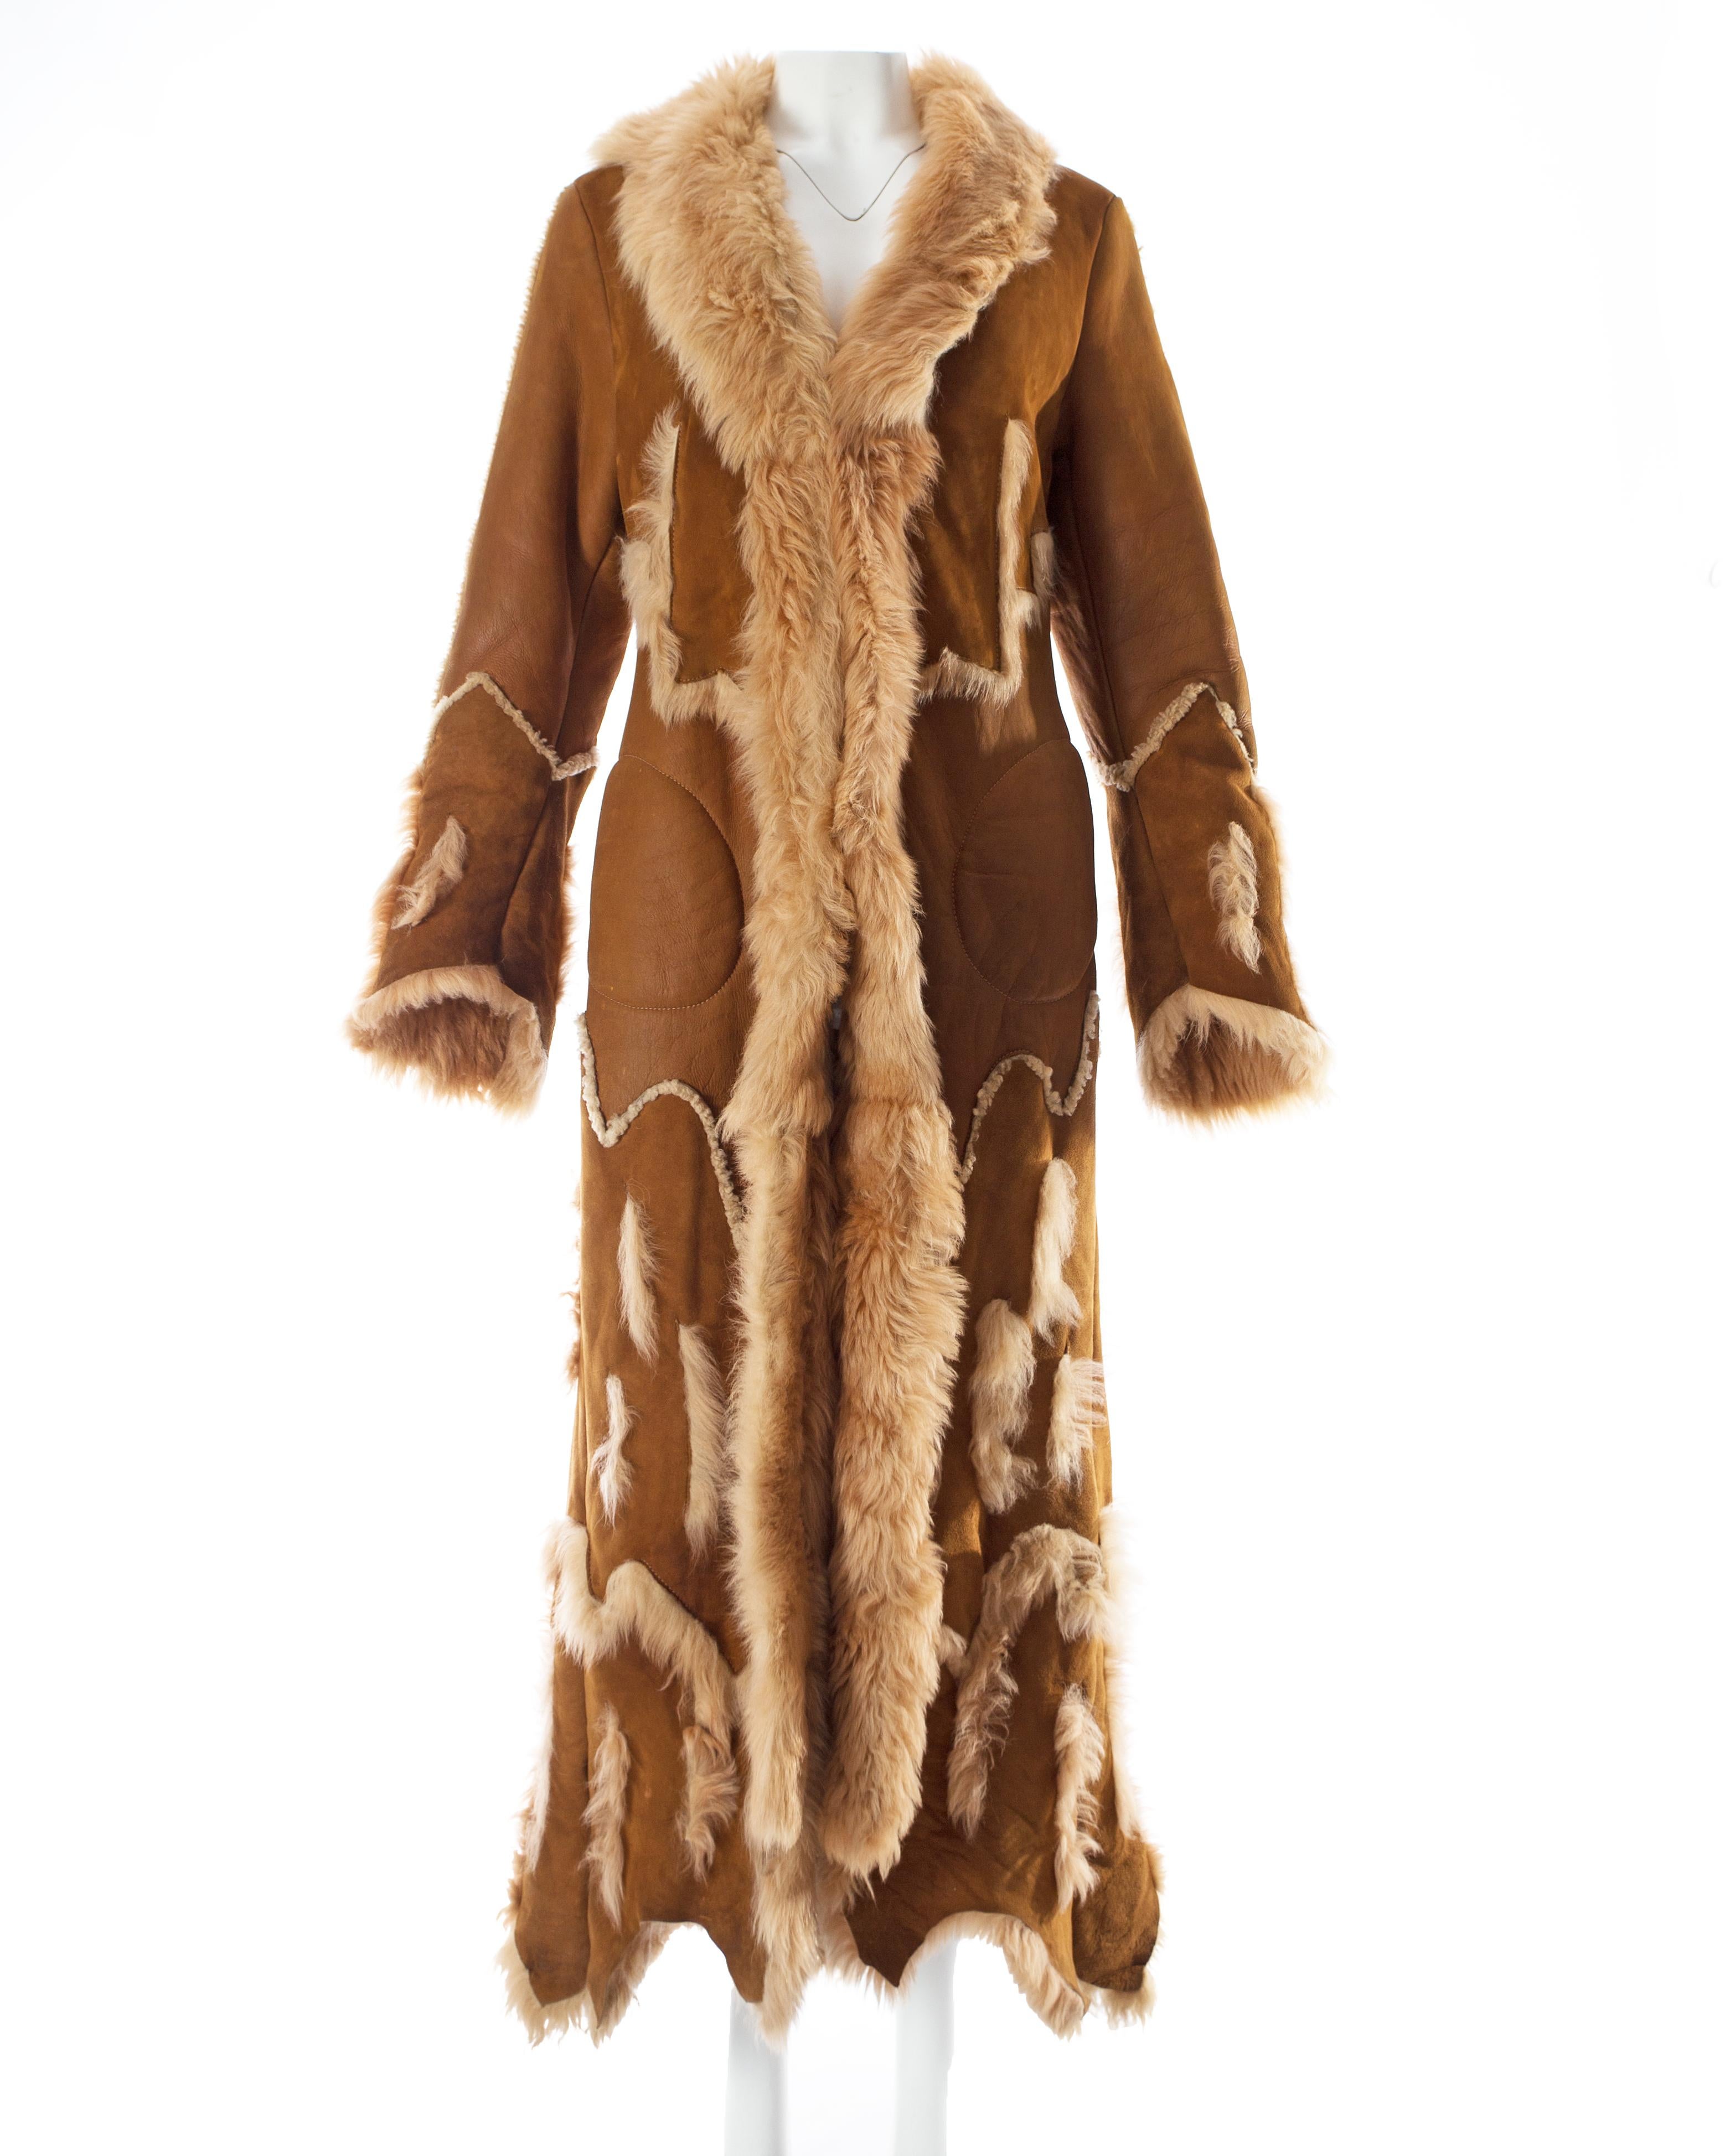 Alexander McQueen full length shearling sheepskin coat 

- Raw edges throughout 
- Shawl lapel 
- Made for a special order 

Autumn-Winter 1996